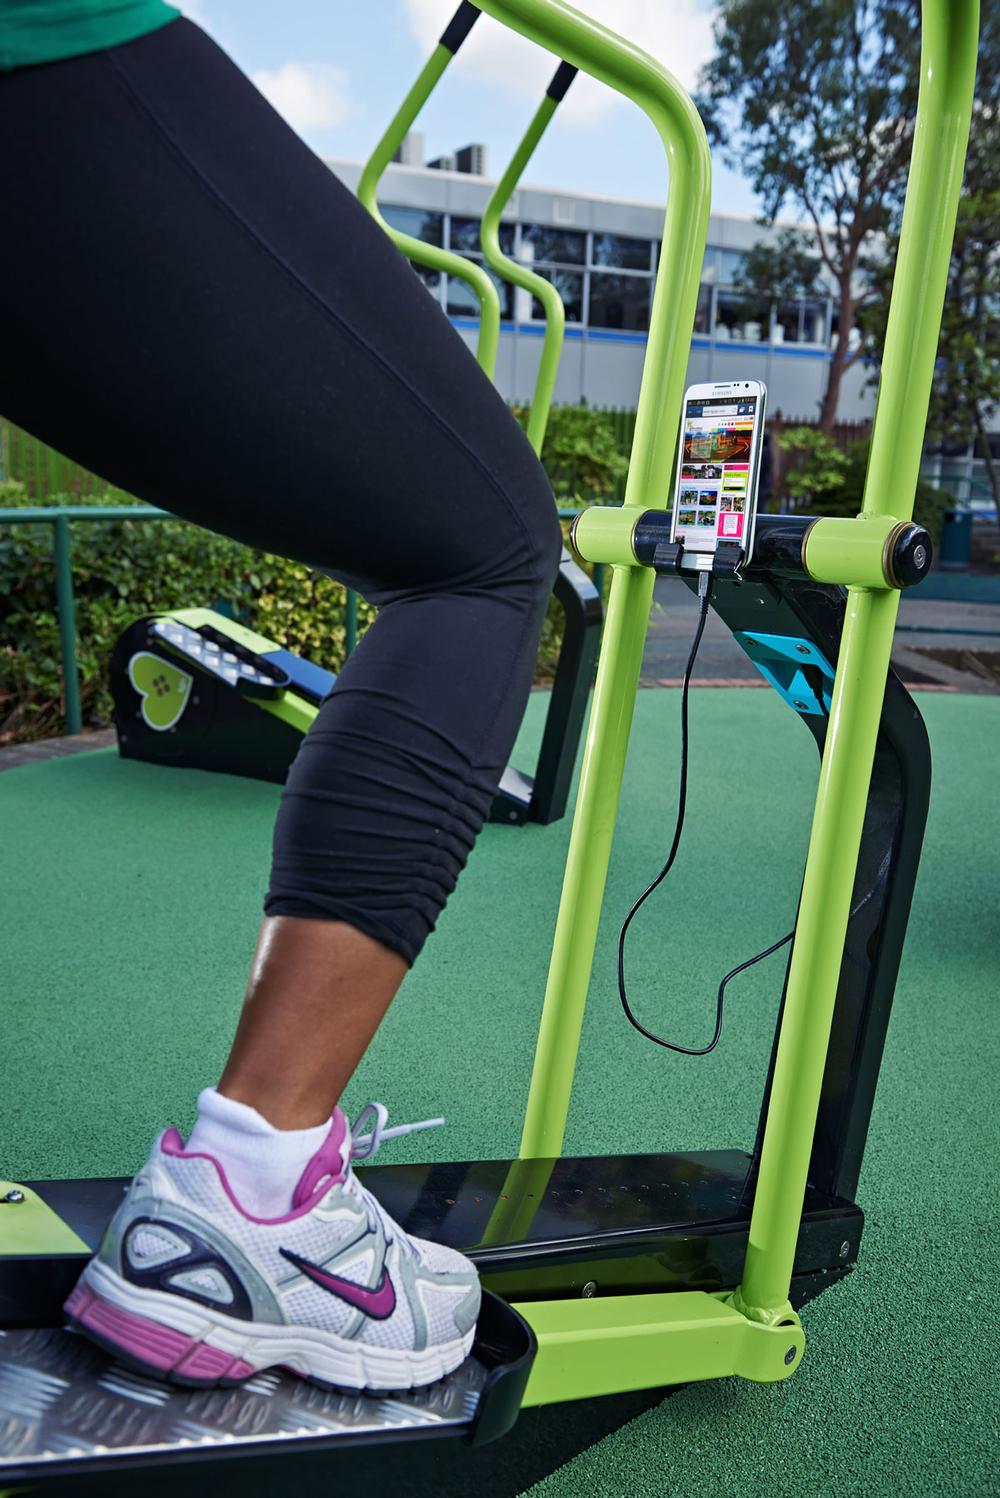 The Great Outdoor Gym Company hopes to open thousands of green energy gyms